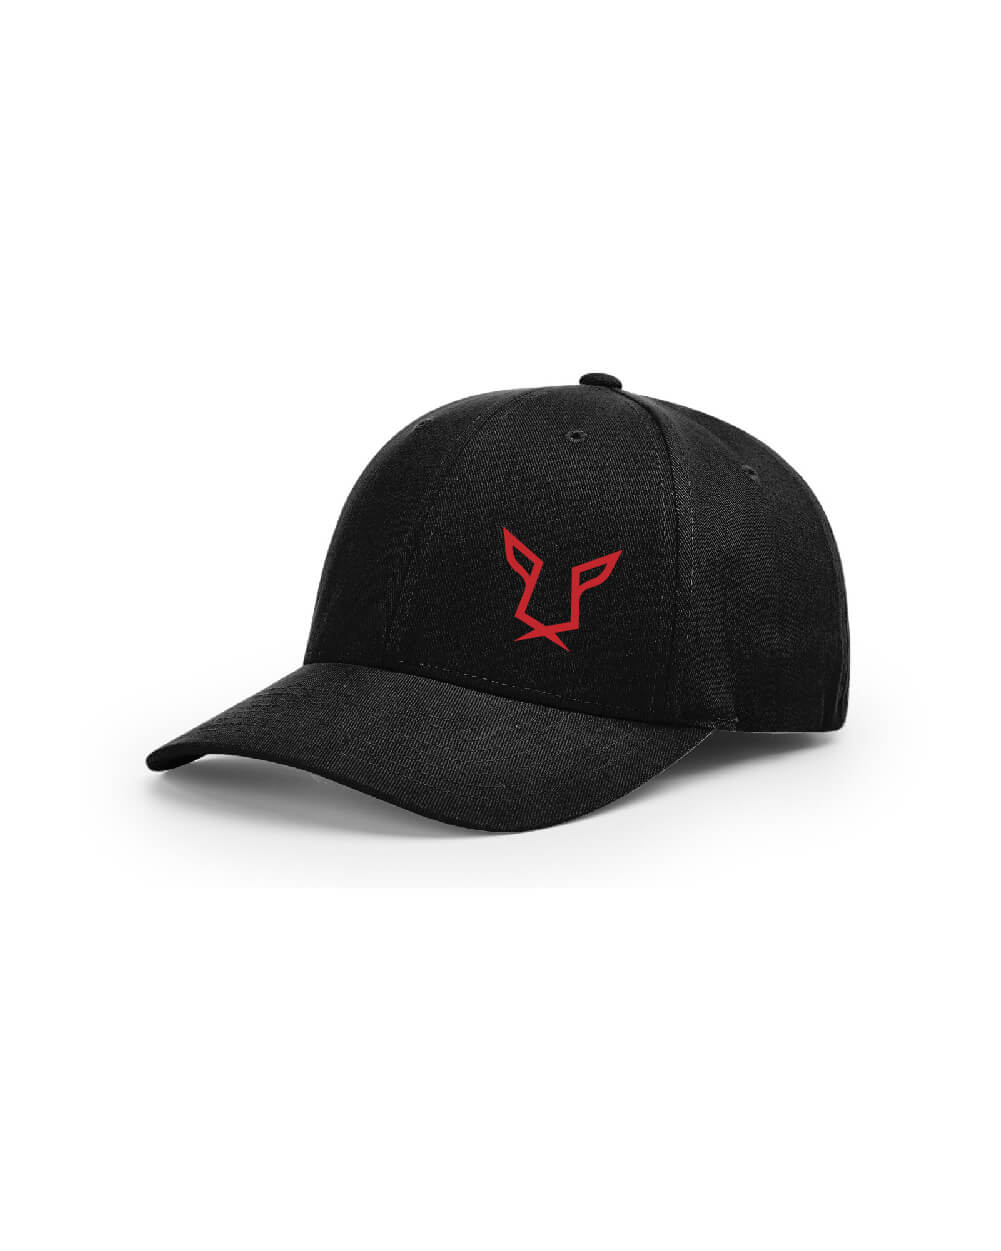 Black & Red Evolution Fitted Hat by Odisi Apparel